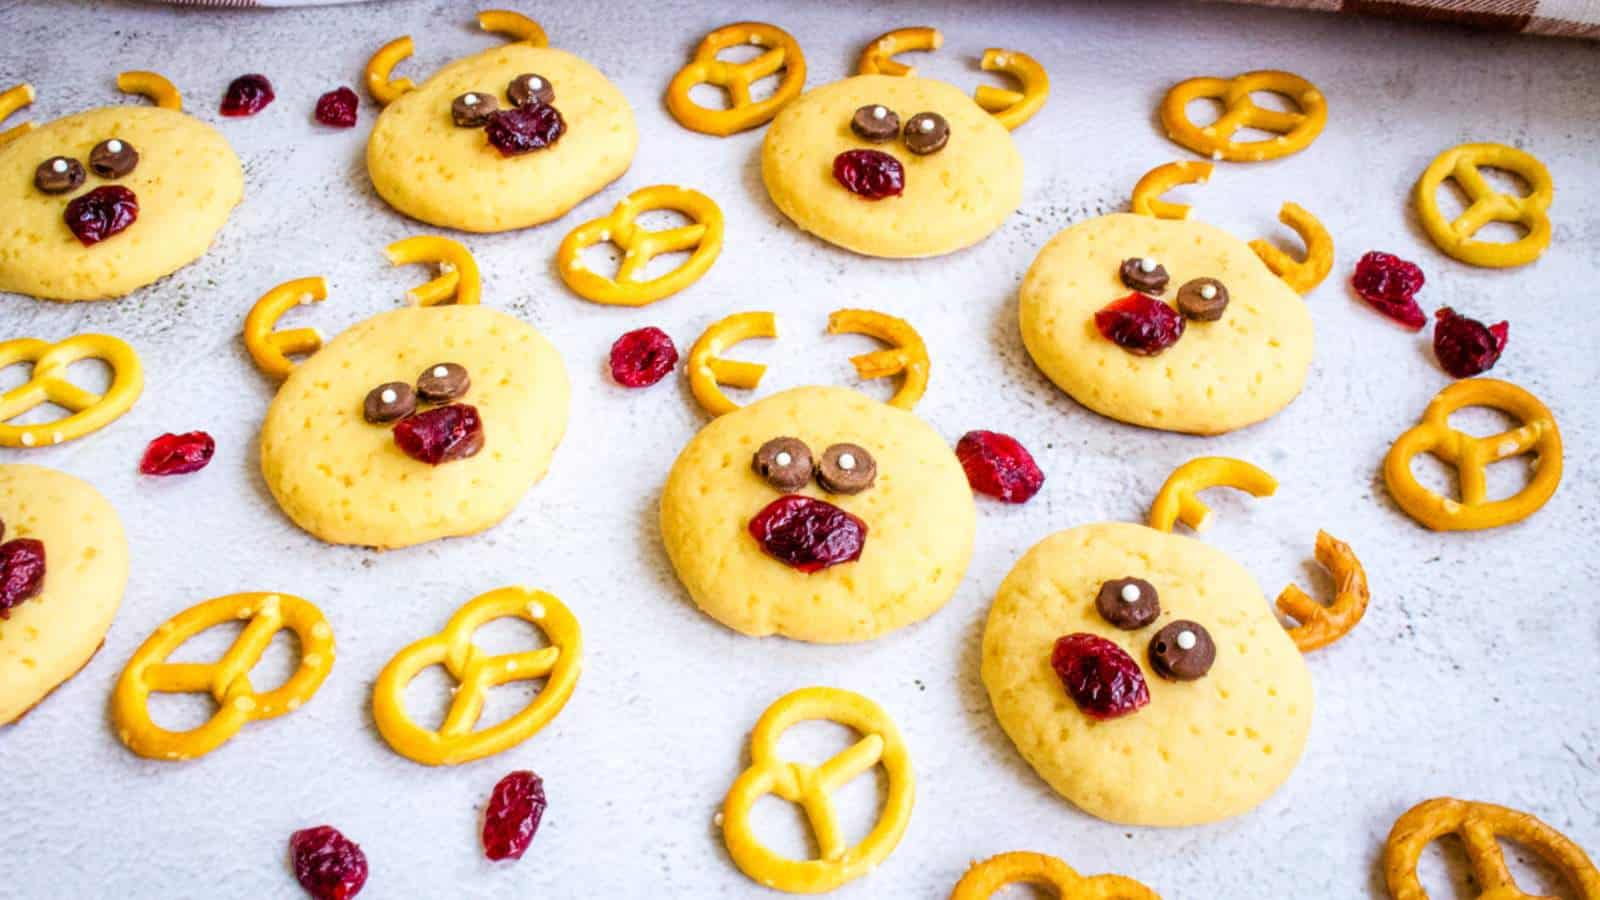 Peanut butter cookies with a face made of pretzels and dried cranberries to look like a reindeer.